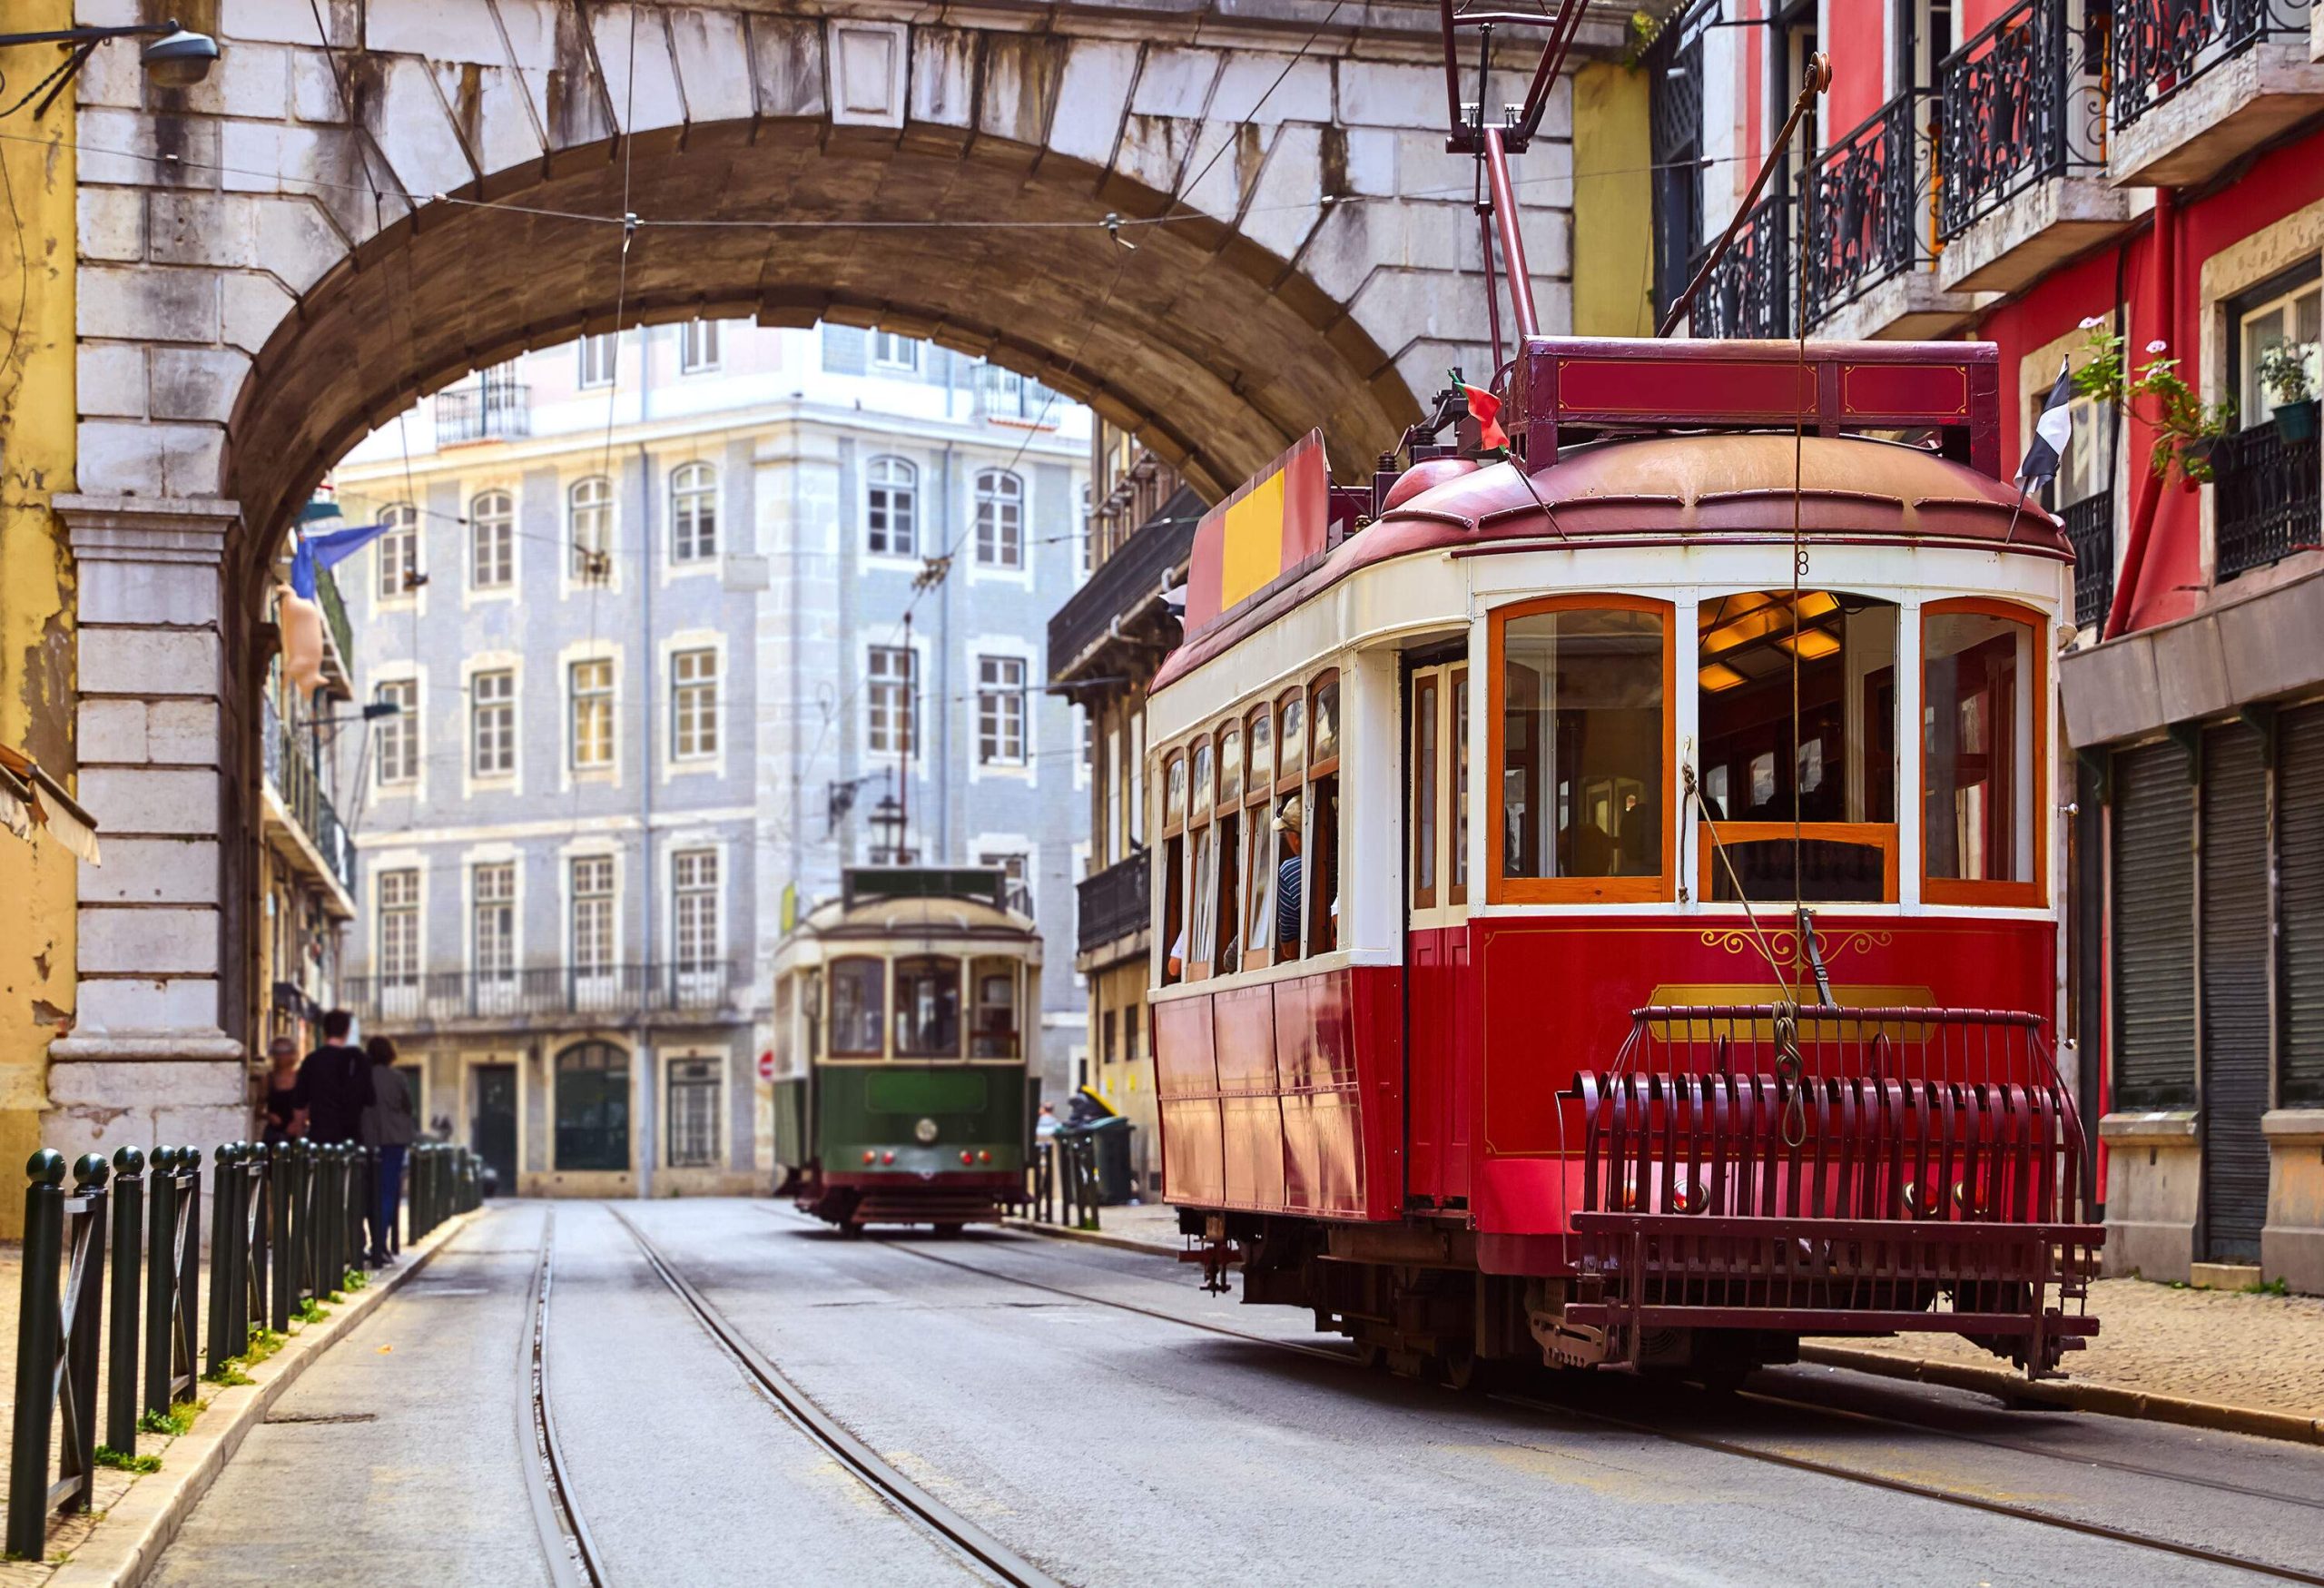 Two red vintage trams pass through an arched entrance across a street lined with old city buildings.